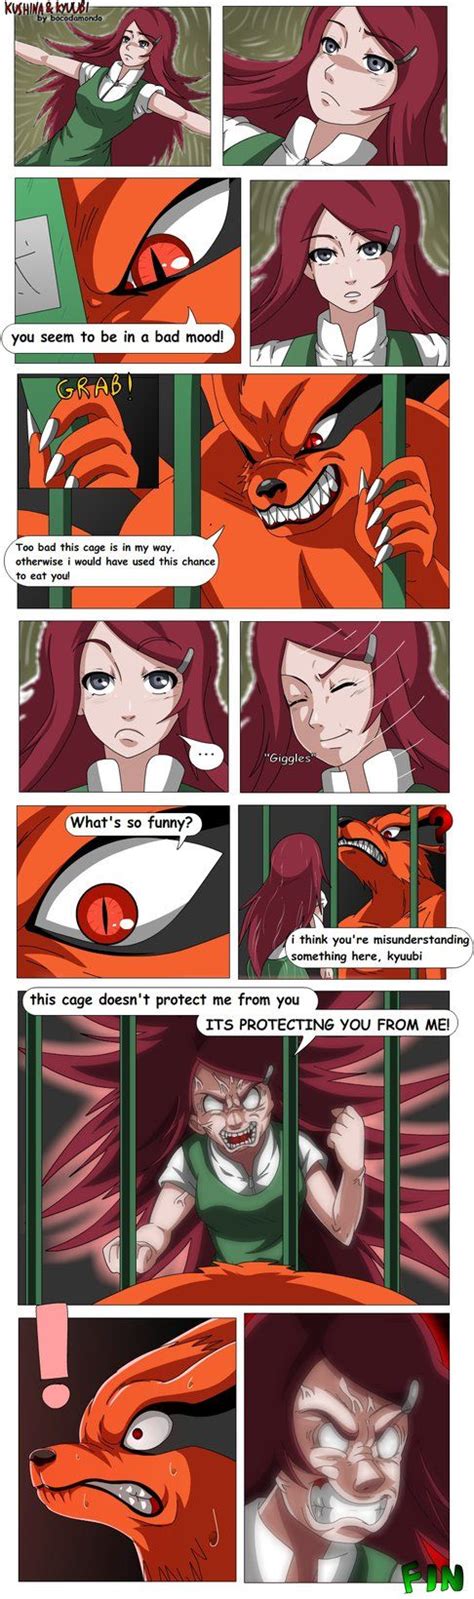 Naruto x kushina x fem kyuubi fanfiction - Chapter 1: The Boy with a Heart Too Big for His Own Good. In the backyard of the Uzumaki-Namikaze estate two female individuals could be seen trading blows. Both of them had breathtaking Crimson Red hair that flowed in the wind current generated from the rapid movements from both of the individuals throwing punch after punch.